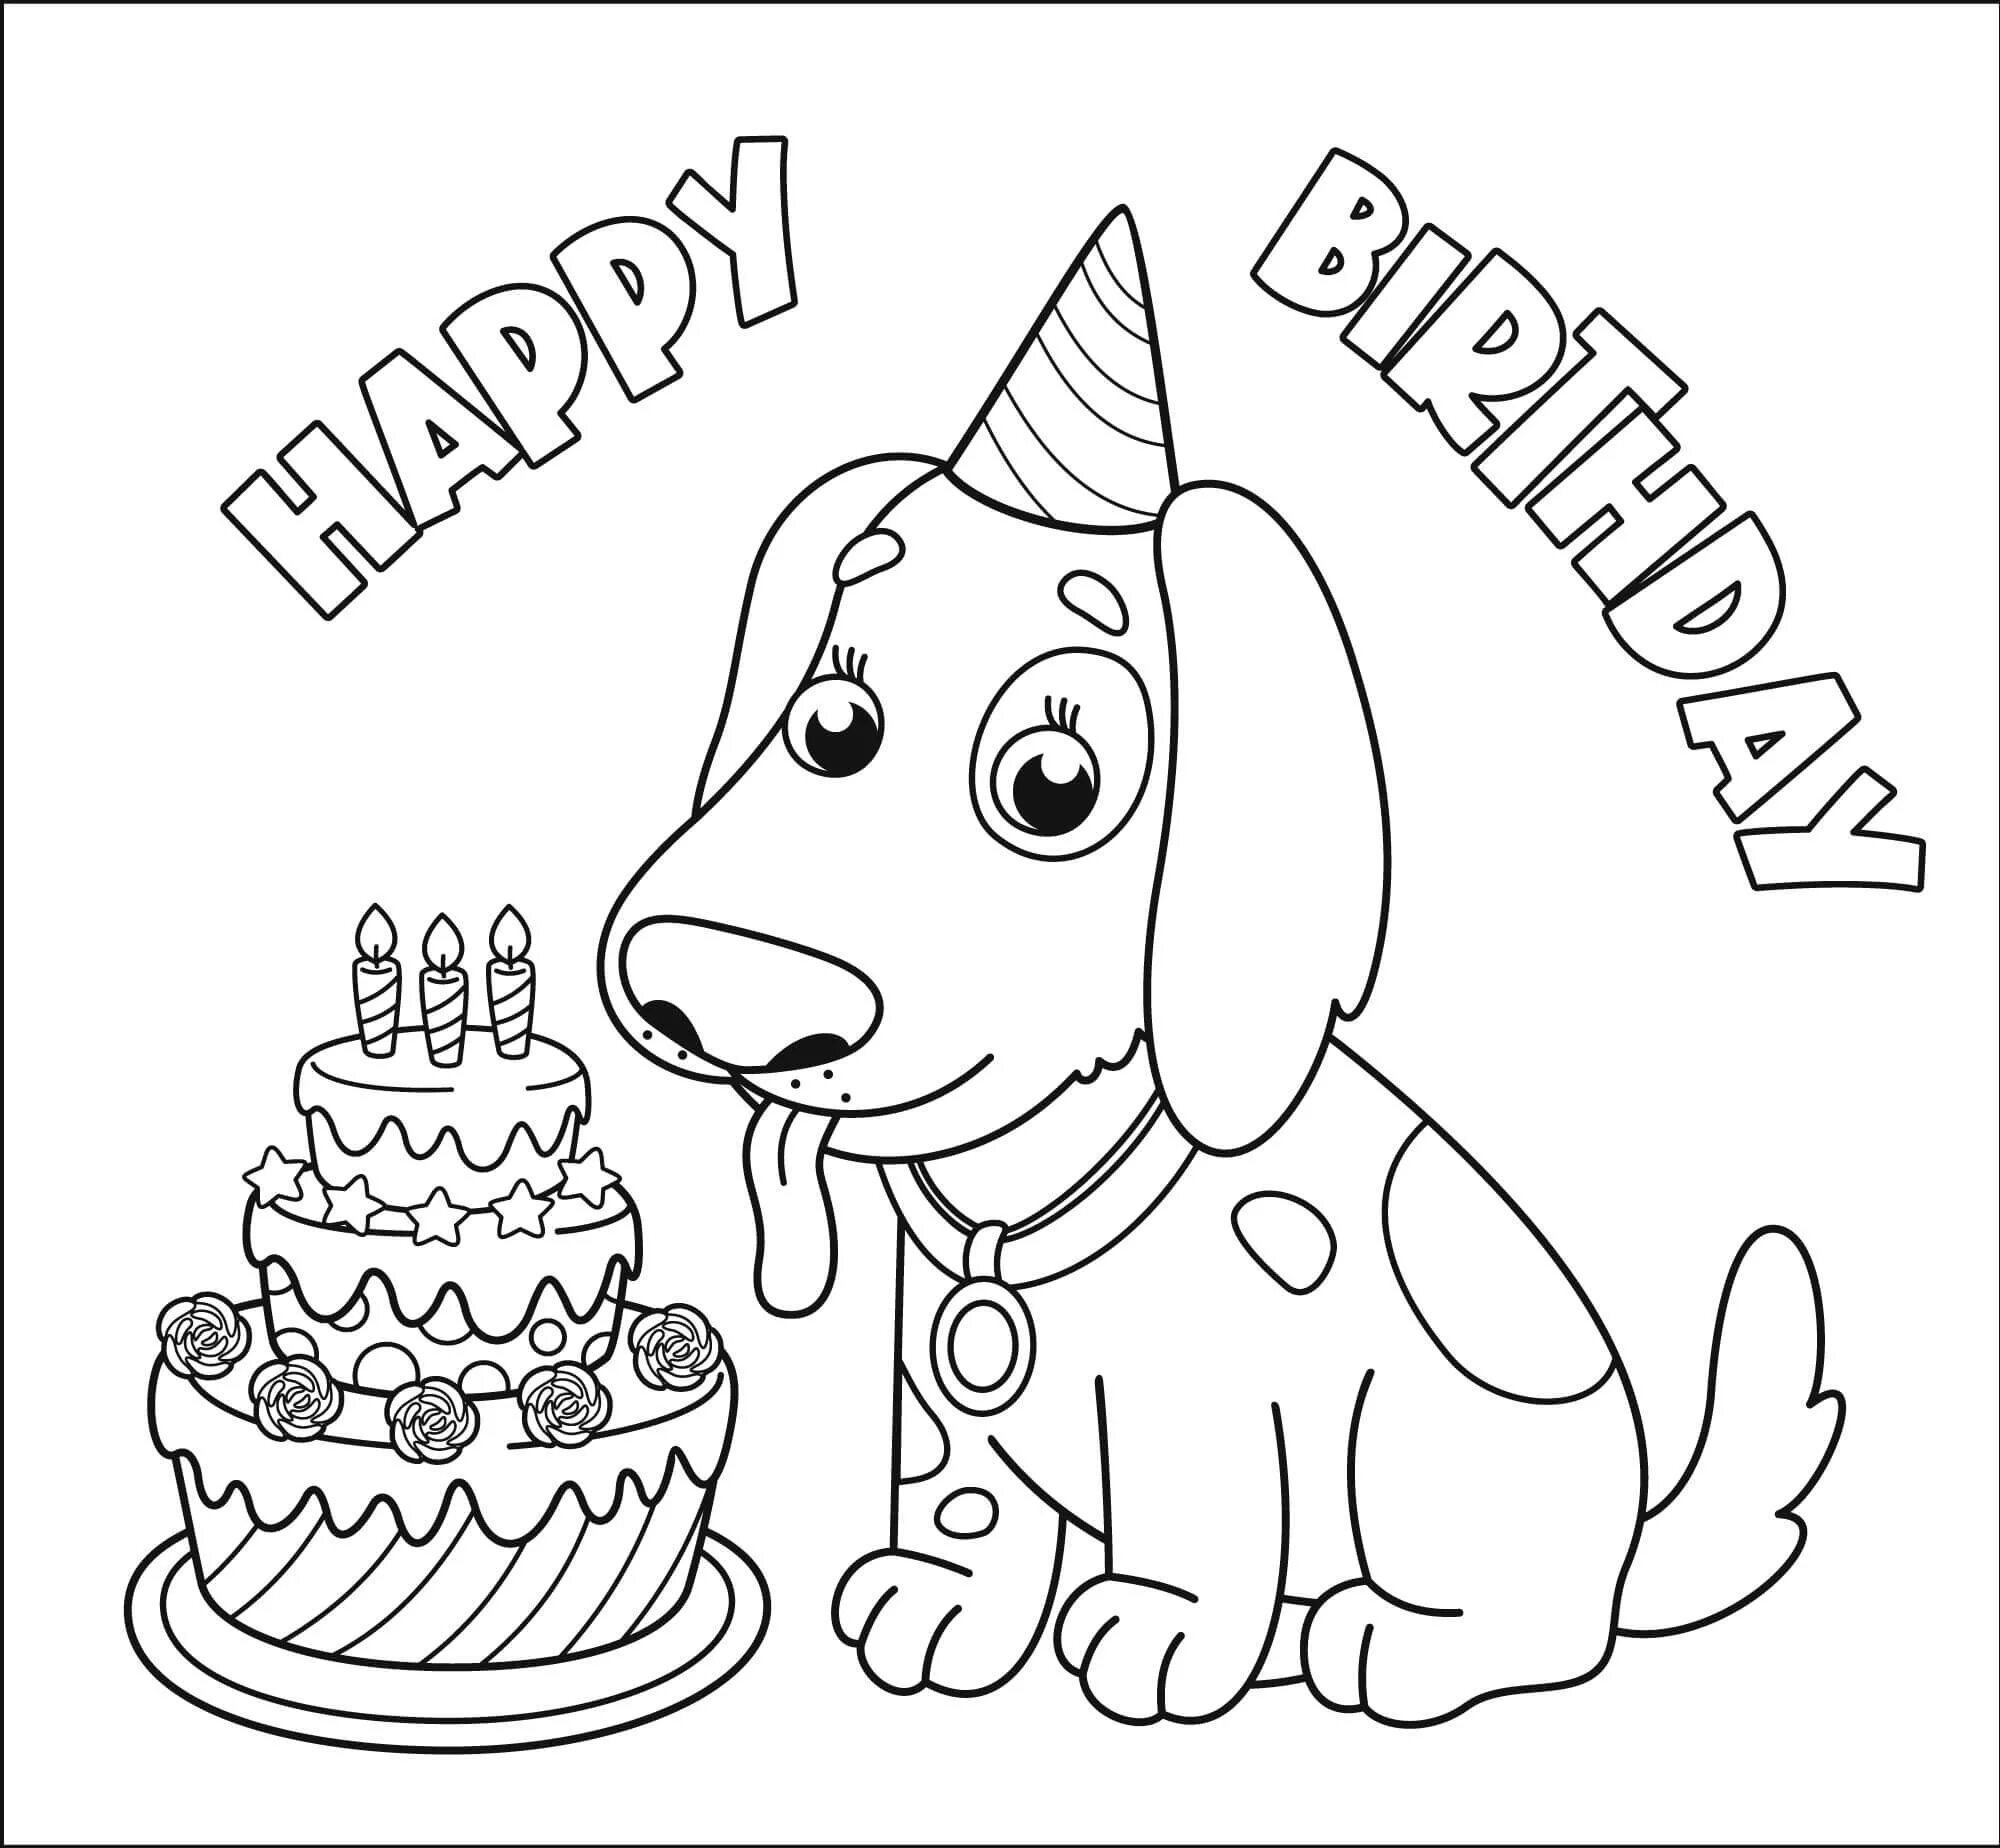 Smiling birthday girl 10 years old coloring page